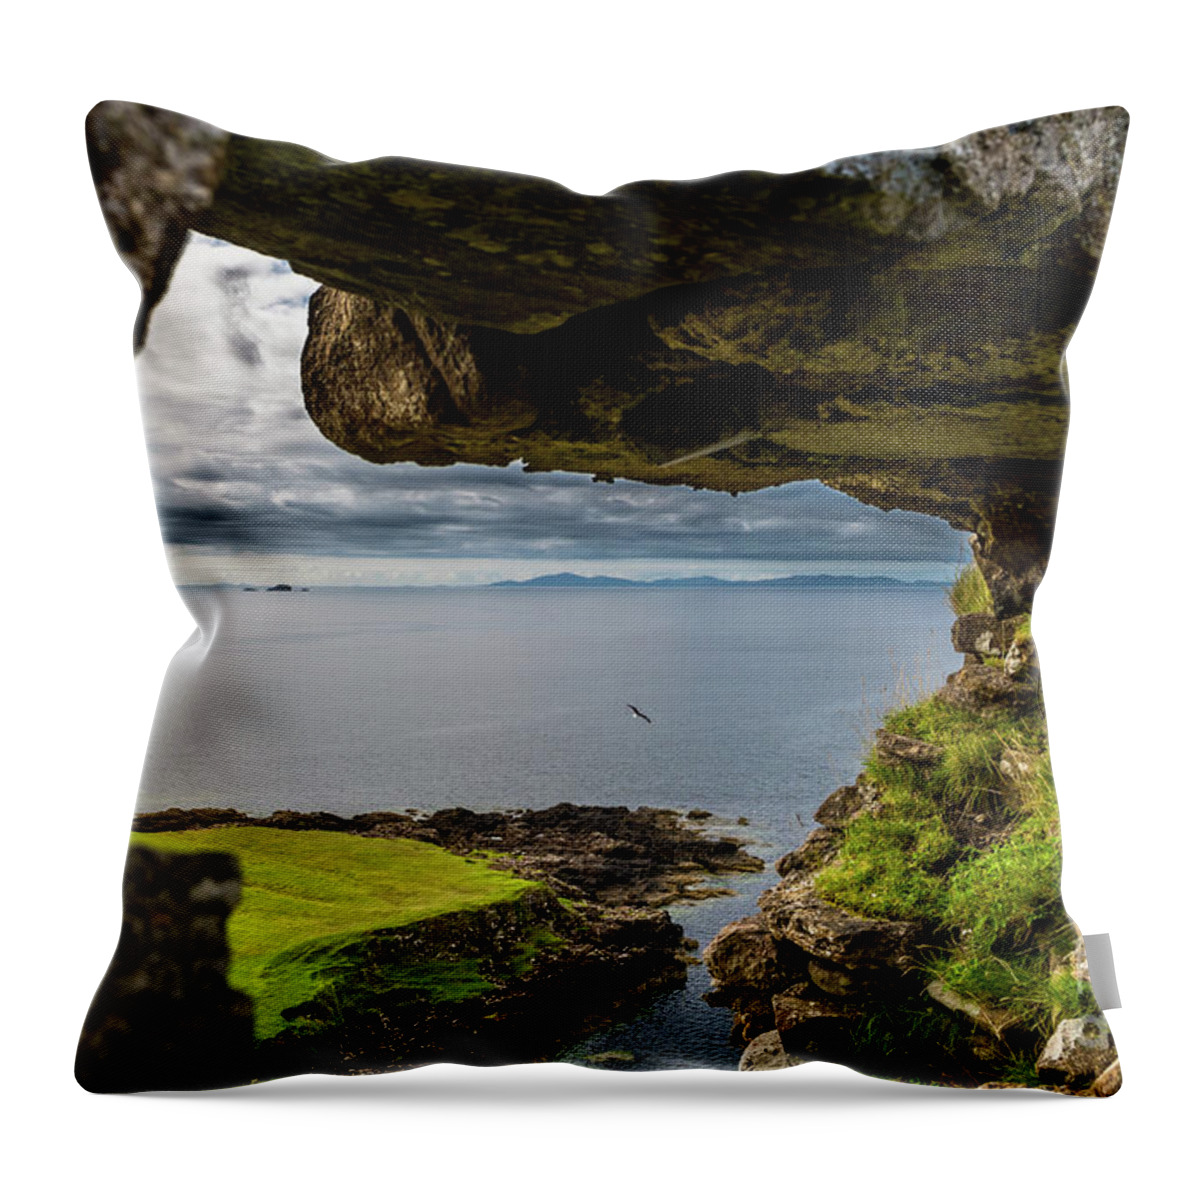 Animal Throw Pillow featuring the photograph Scenic View Through Stone Window At Duntulm Castle At The Coast Of The Isle Of Skye In Scotland by Andreas Berthold